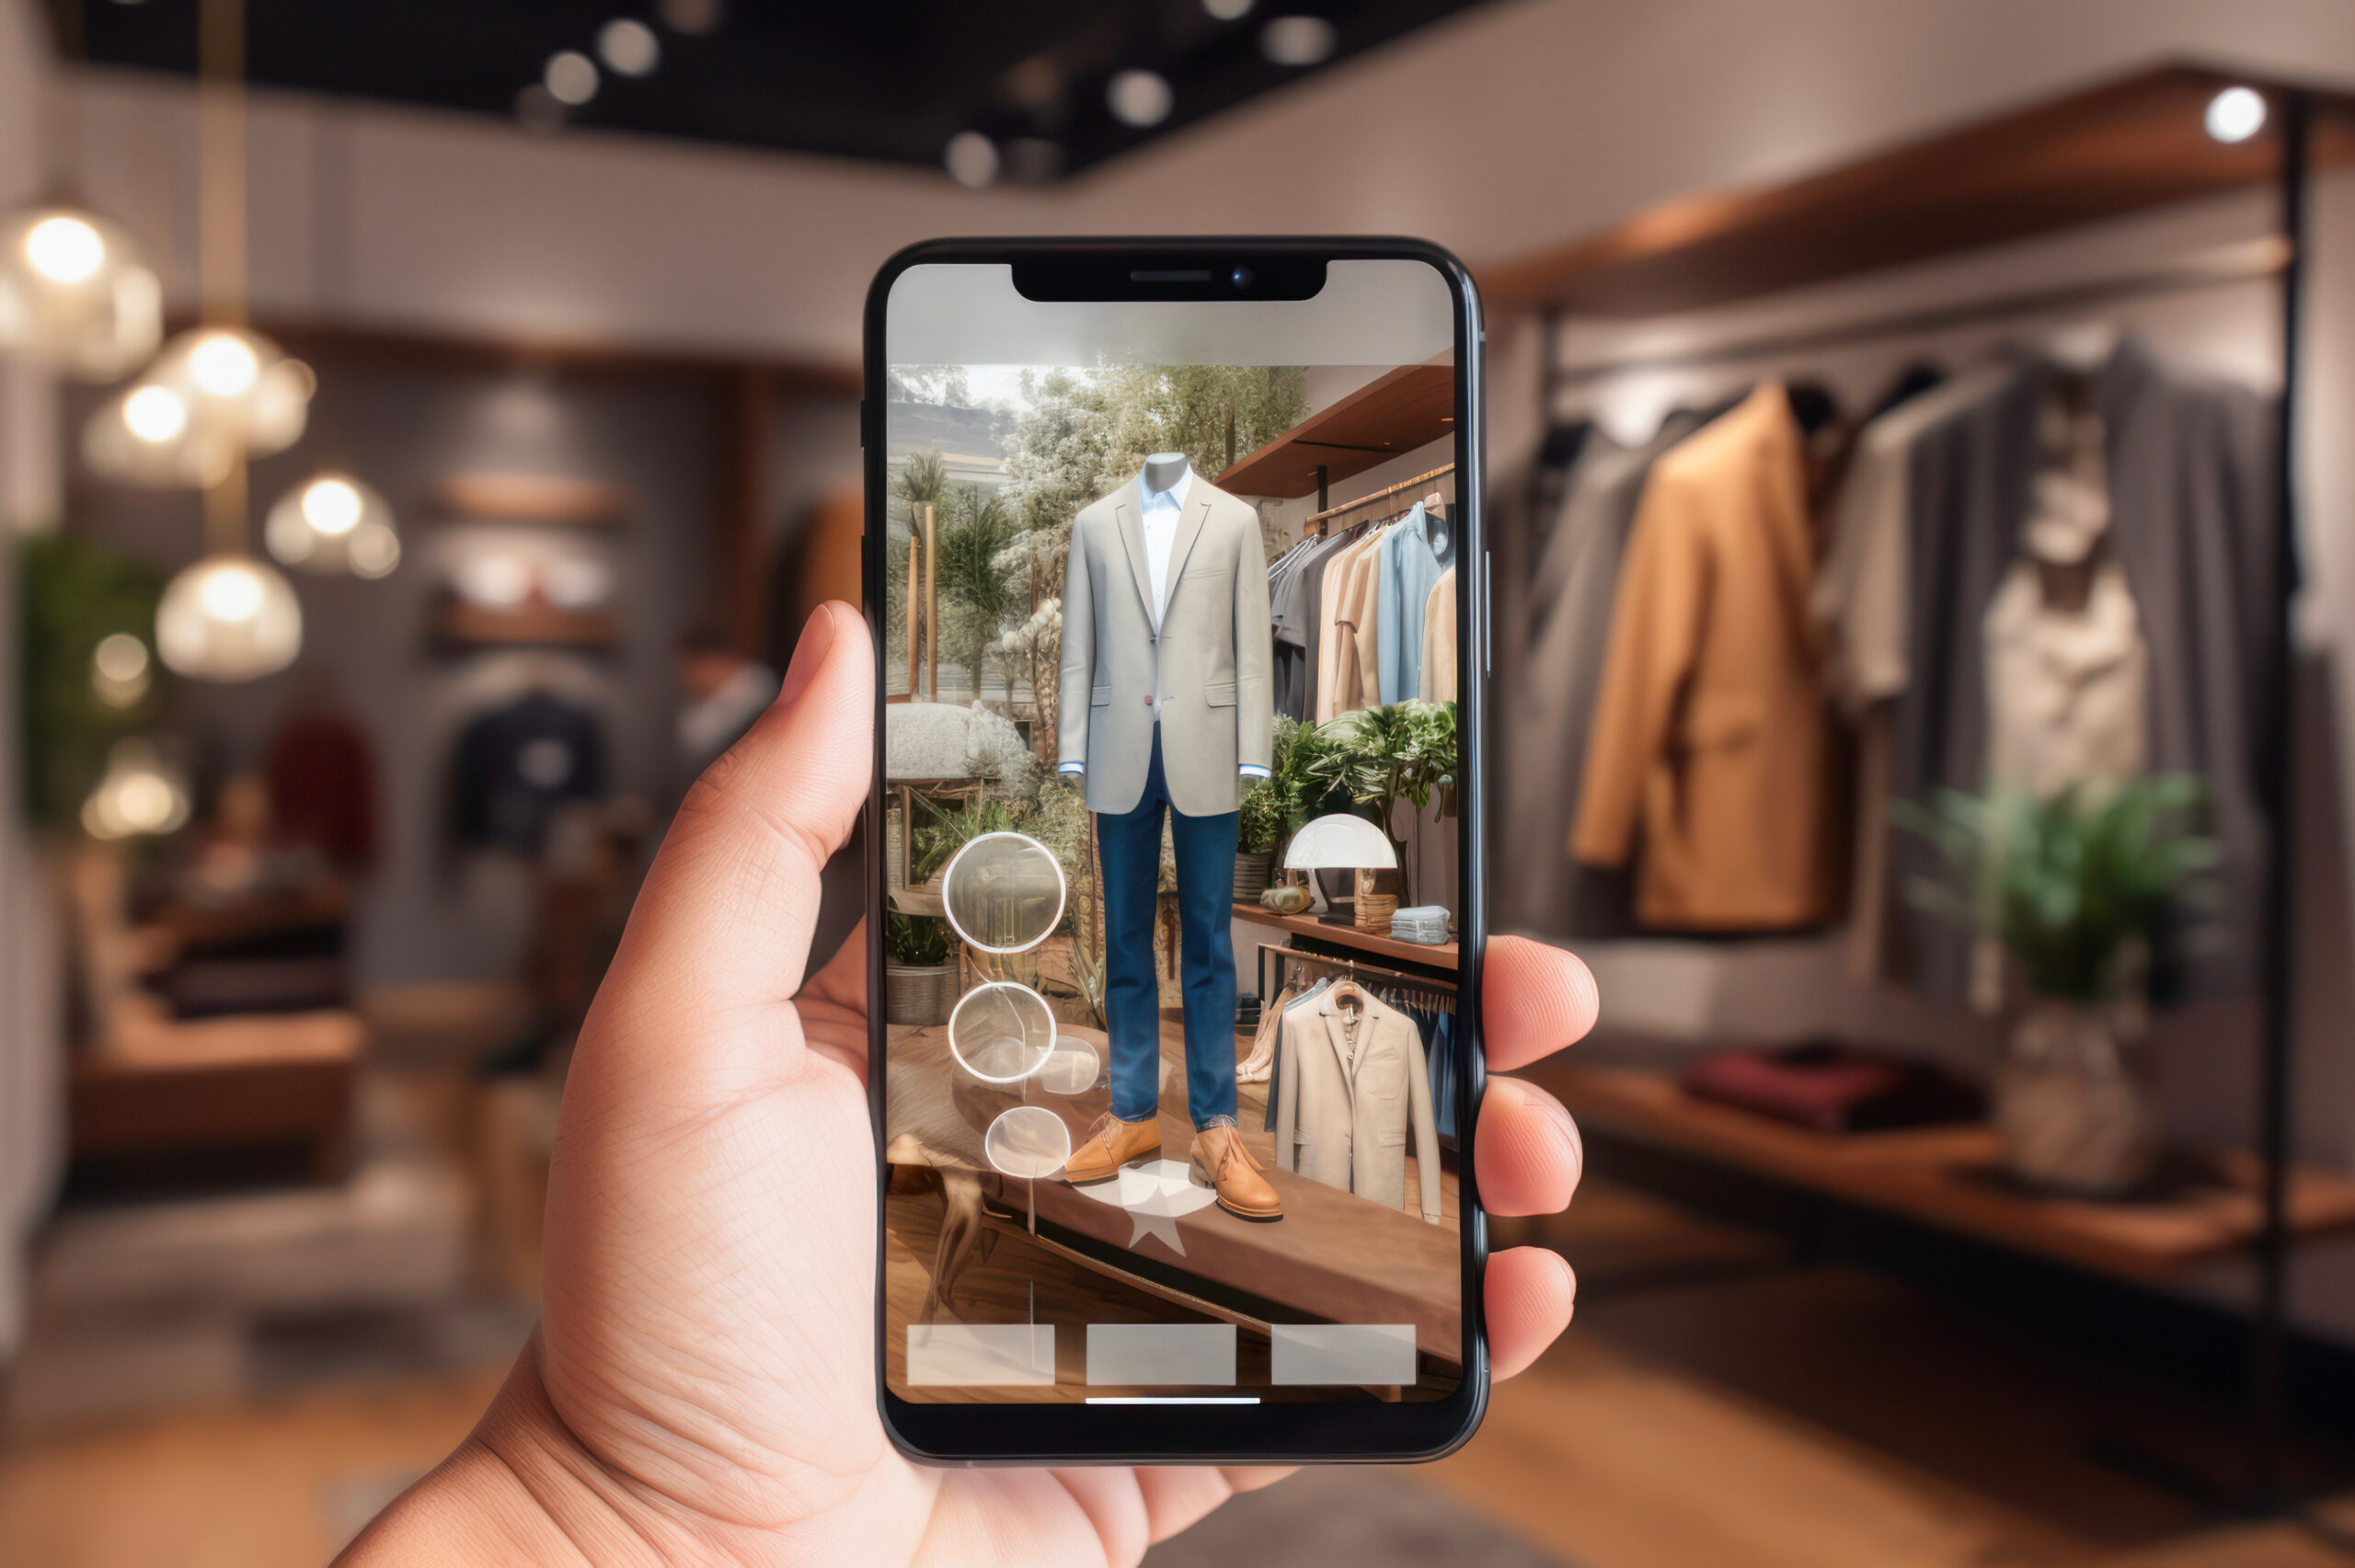 AI helps retailers offer personalized suggestions in real time.